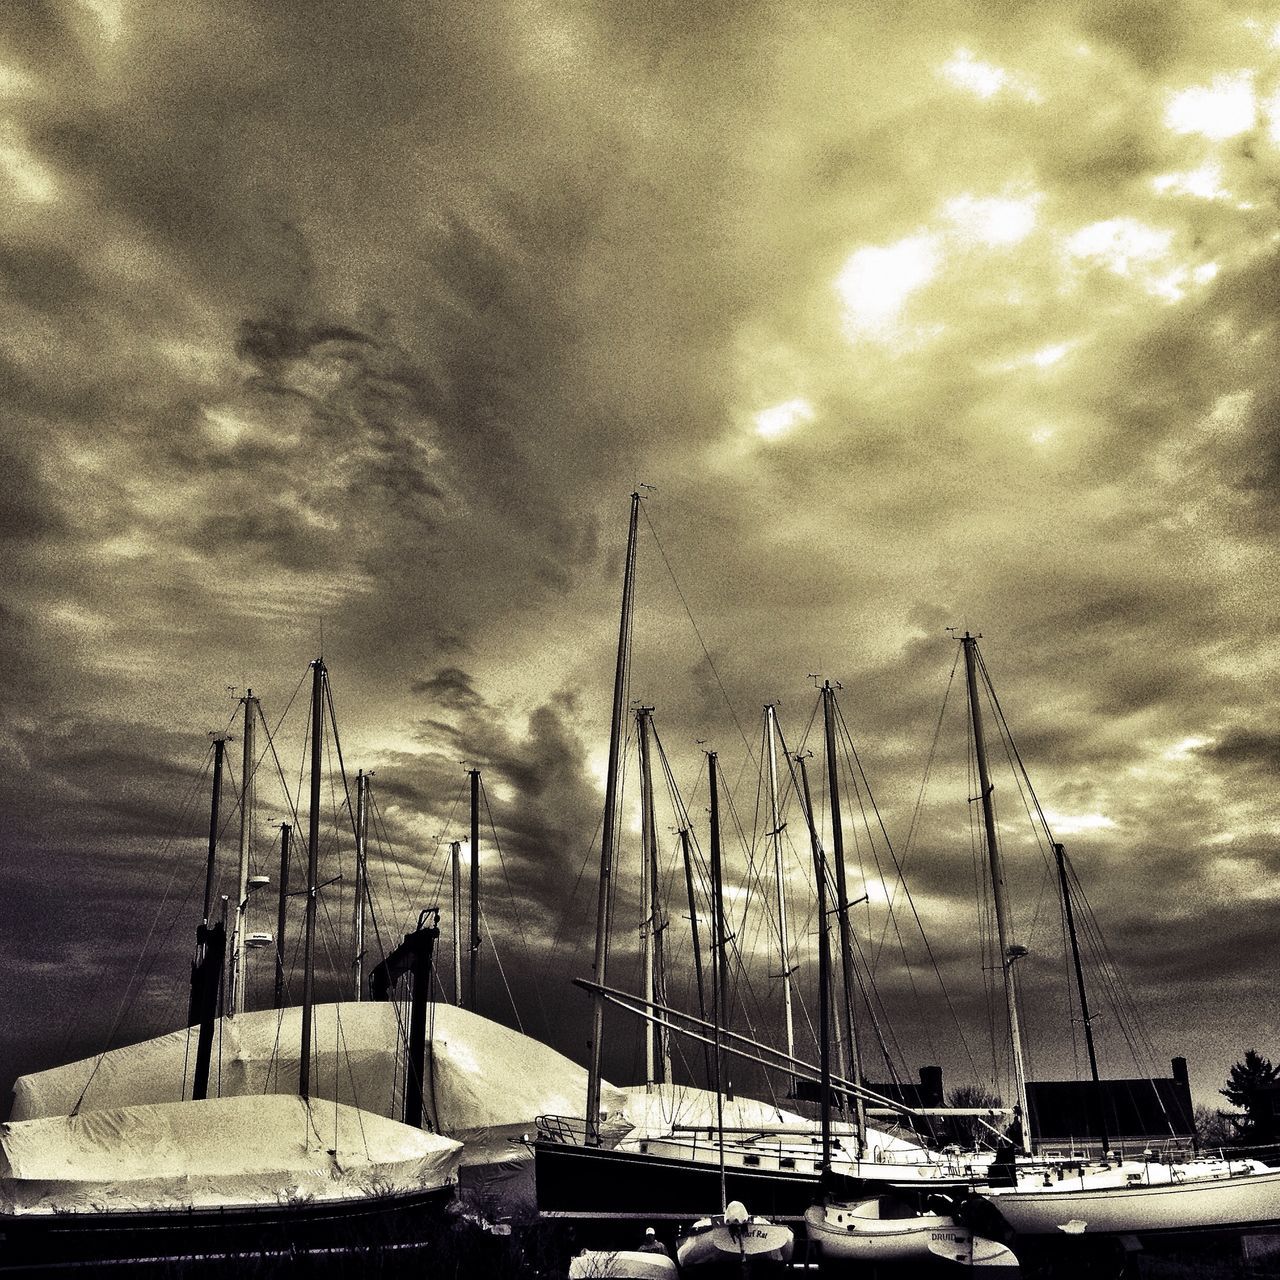 sky, nautical vessel, transportation, cloud - sky, mode of transport, cloudy, moored, water, harbor, boat, sea, mast, weather, cloud, sunset, nature, overcast, outdoors, no people, dusk